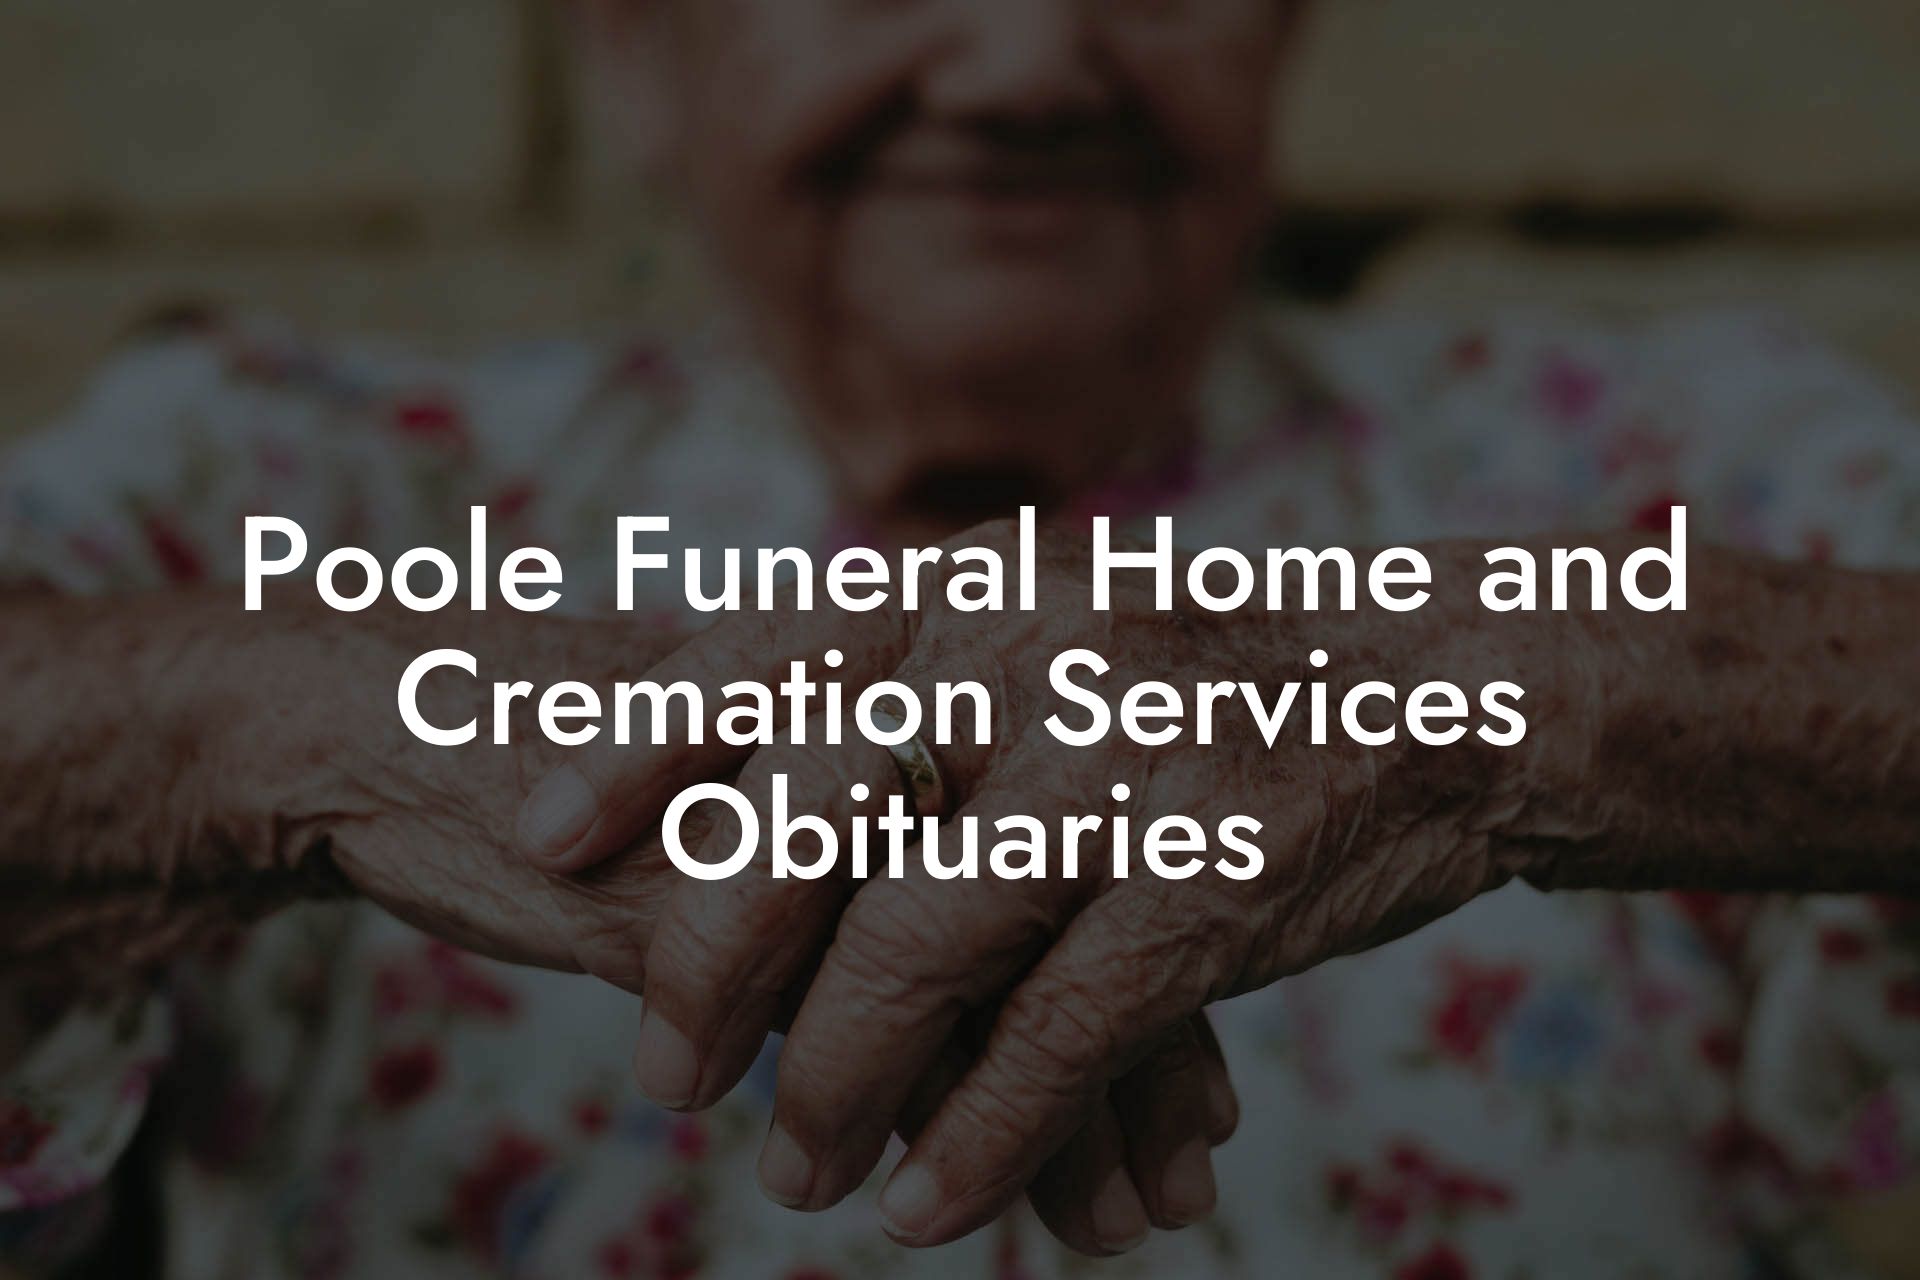 Poole Funeral Home and Cremation Services Obituaries